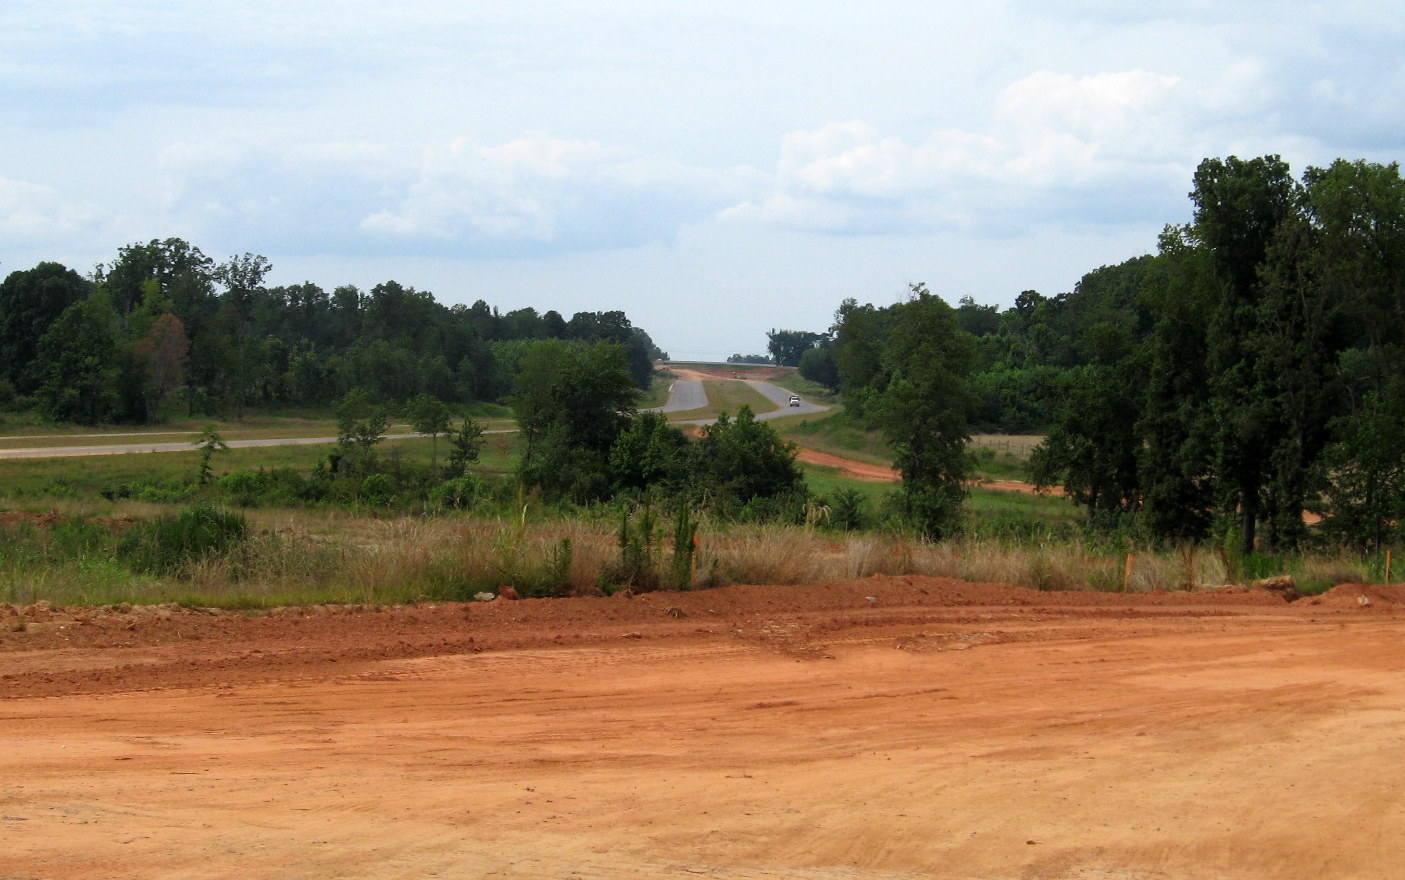 Photo showing progress in building exit ramps at US 311 for interchange with 
future I-74 freeway, June 2012